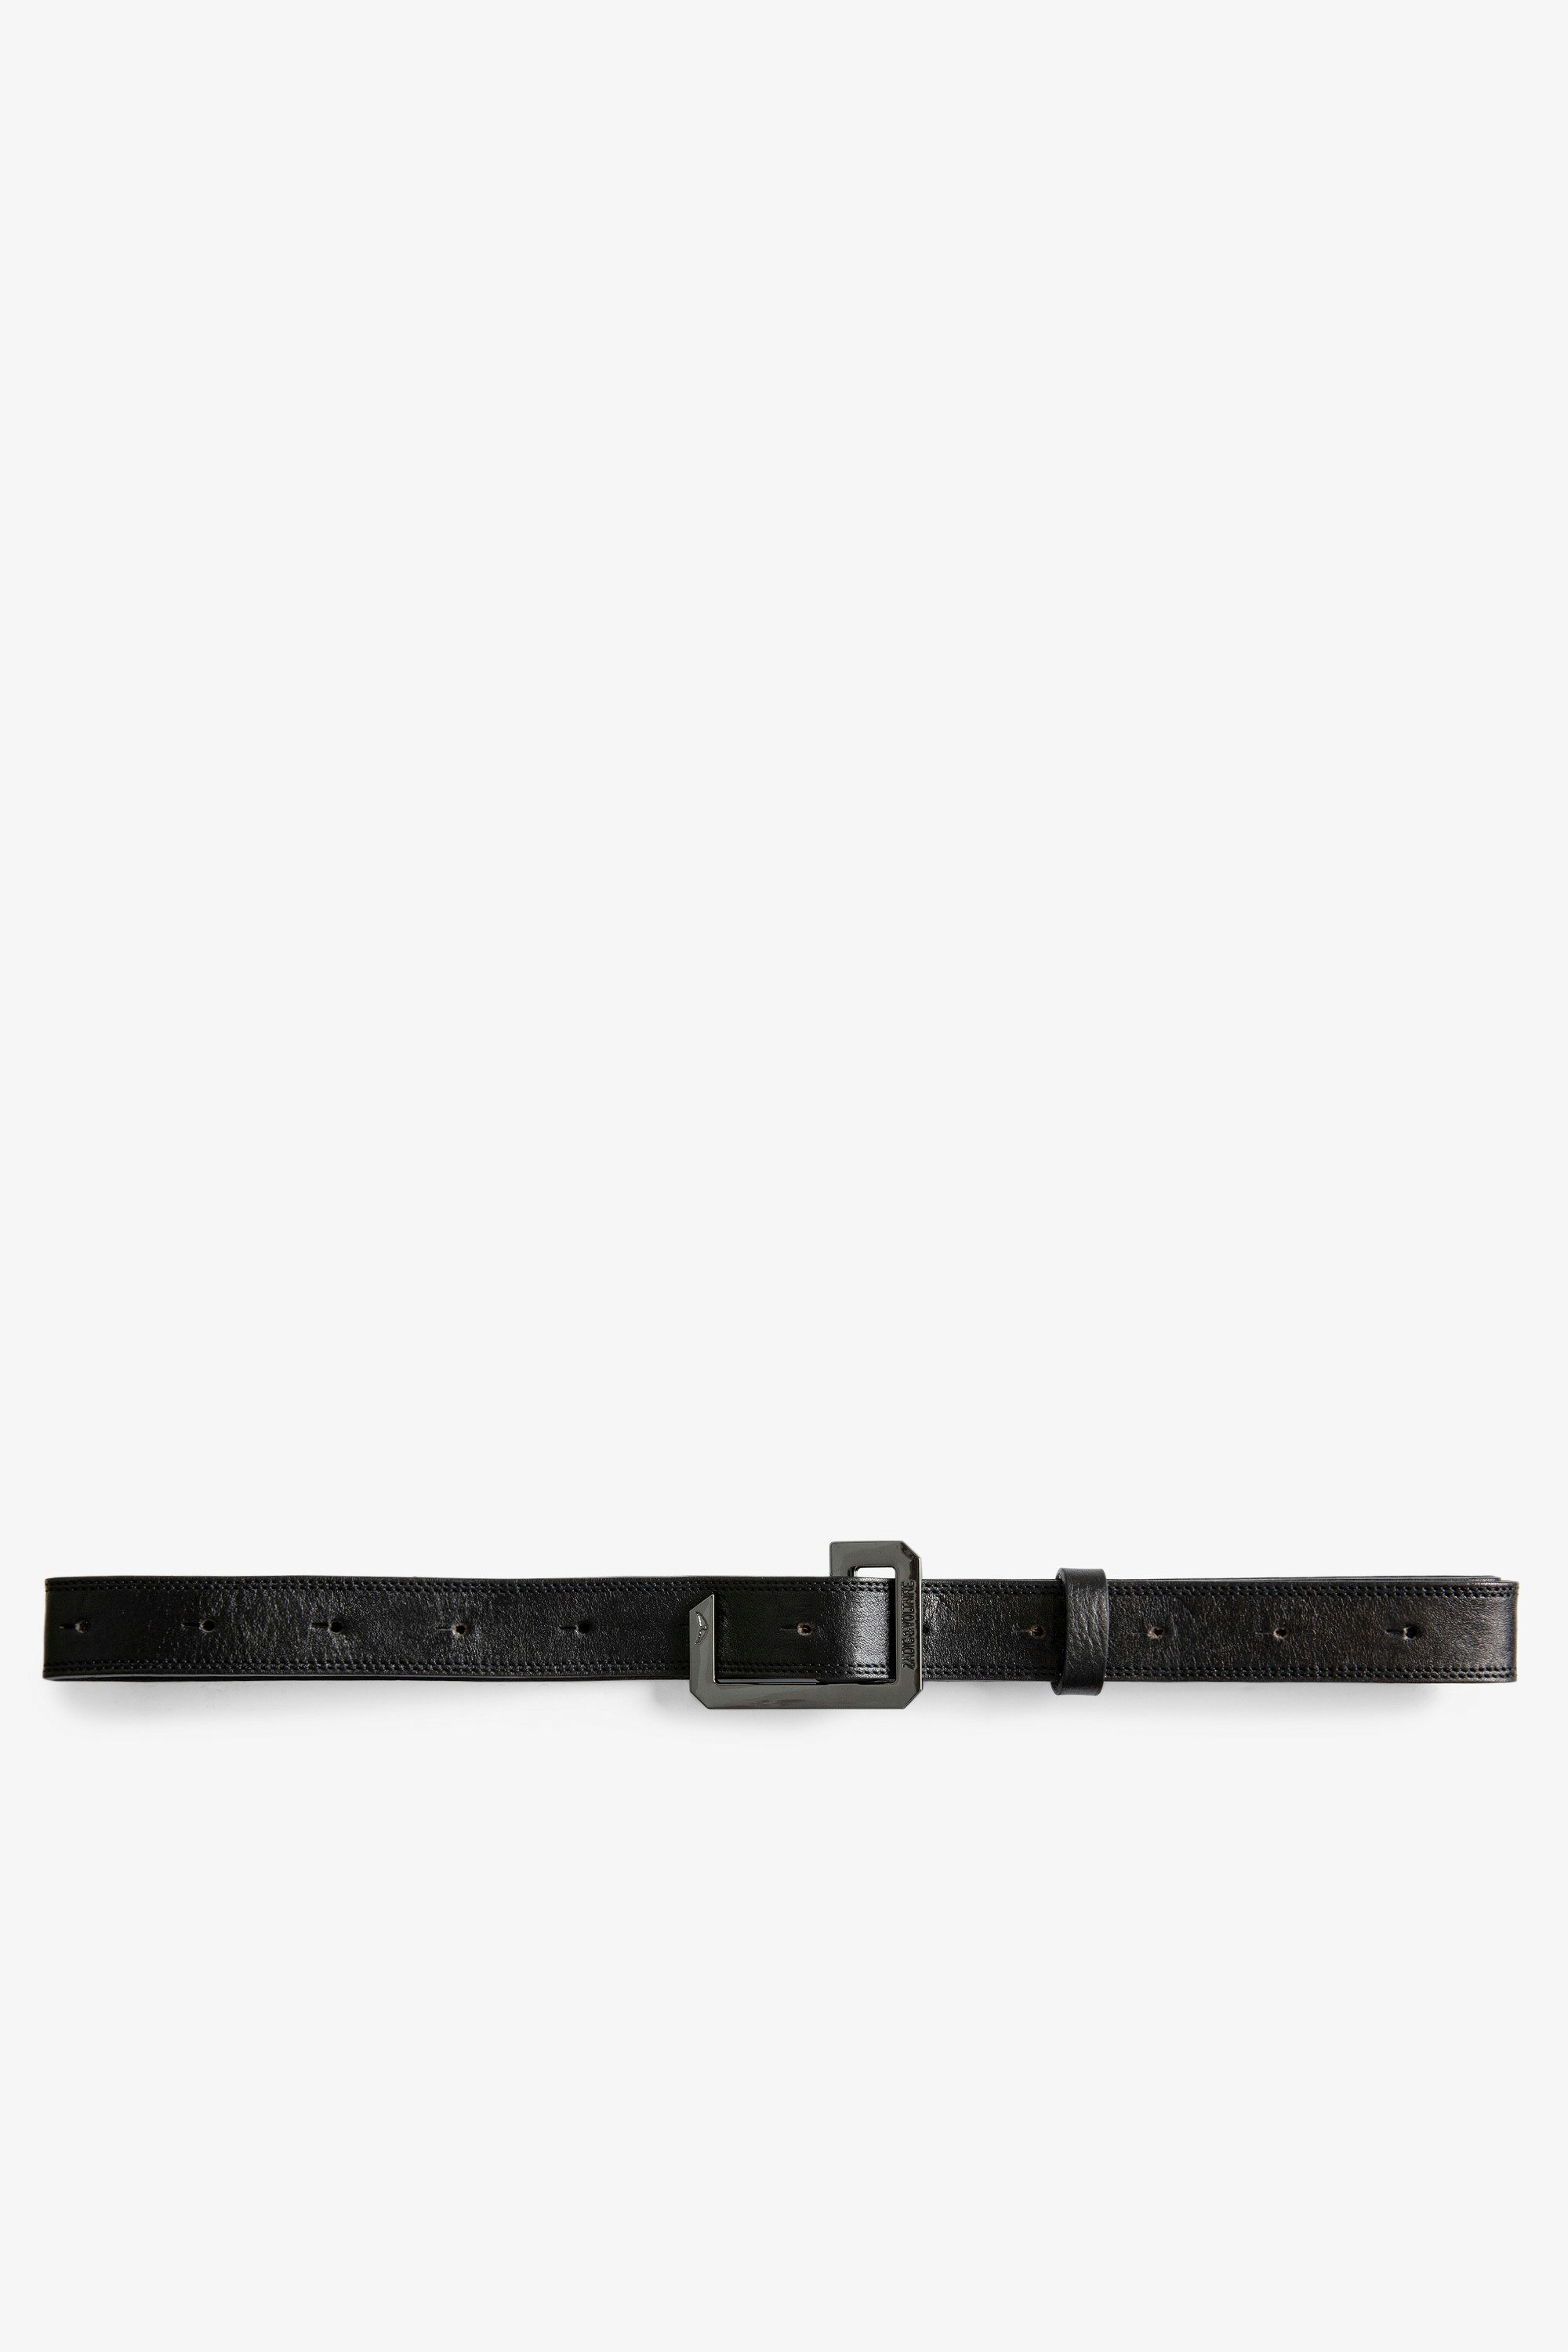 La Cecilia Belt Leather - Women's black leather belt with black C-shaped buckle. Buying this product, you support a responsible leather production through Leather Working Group.